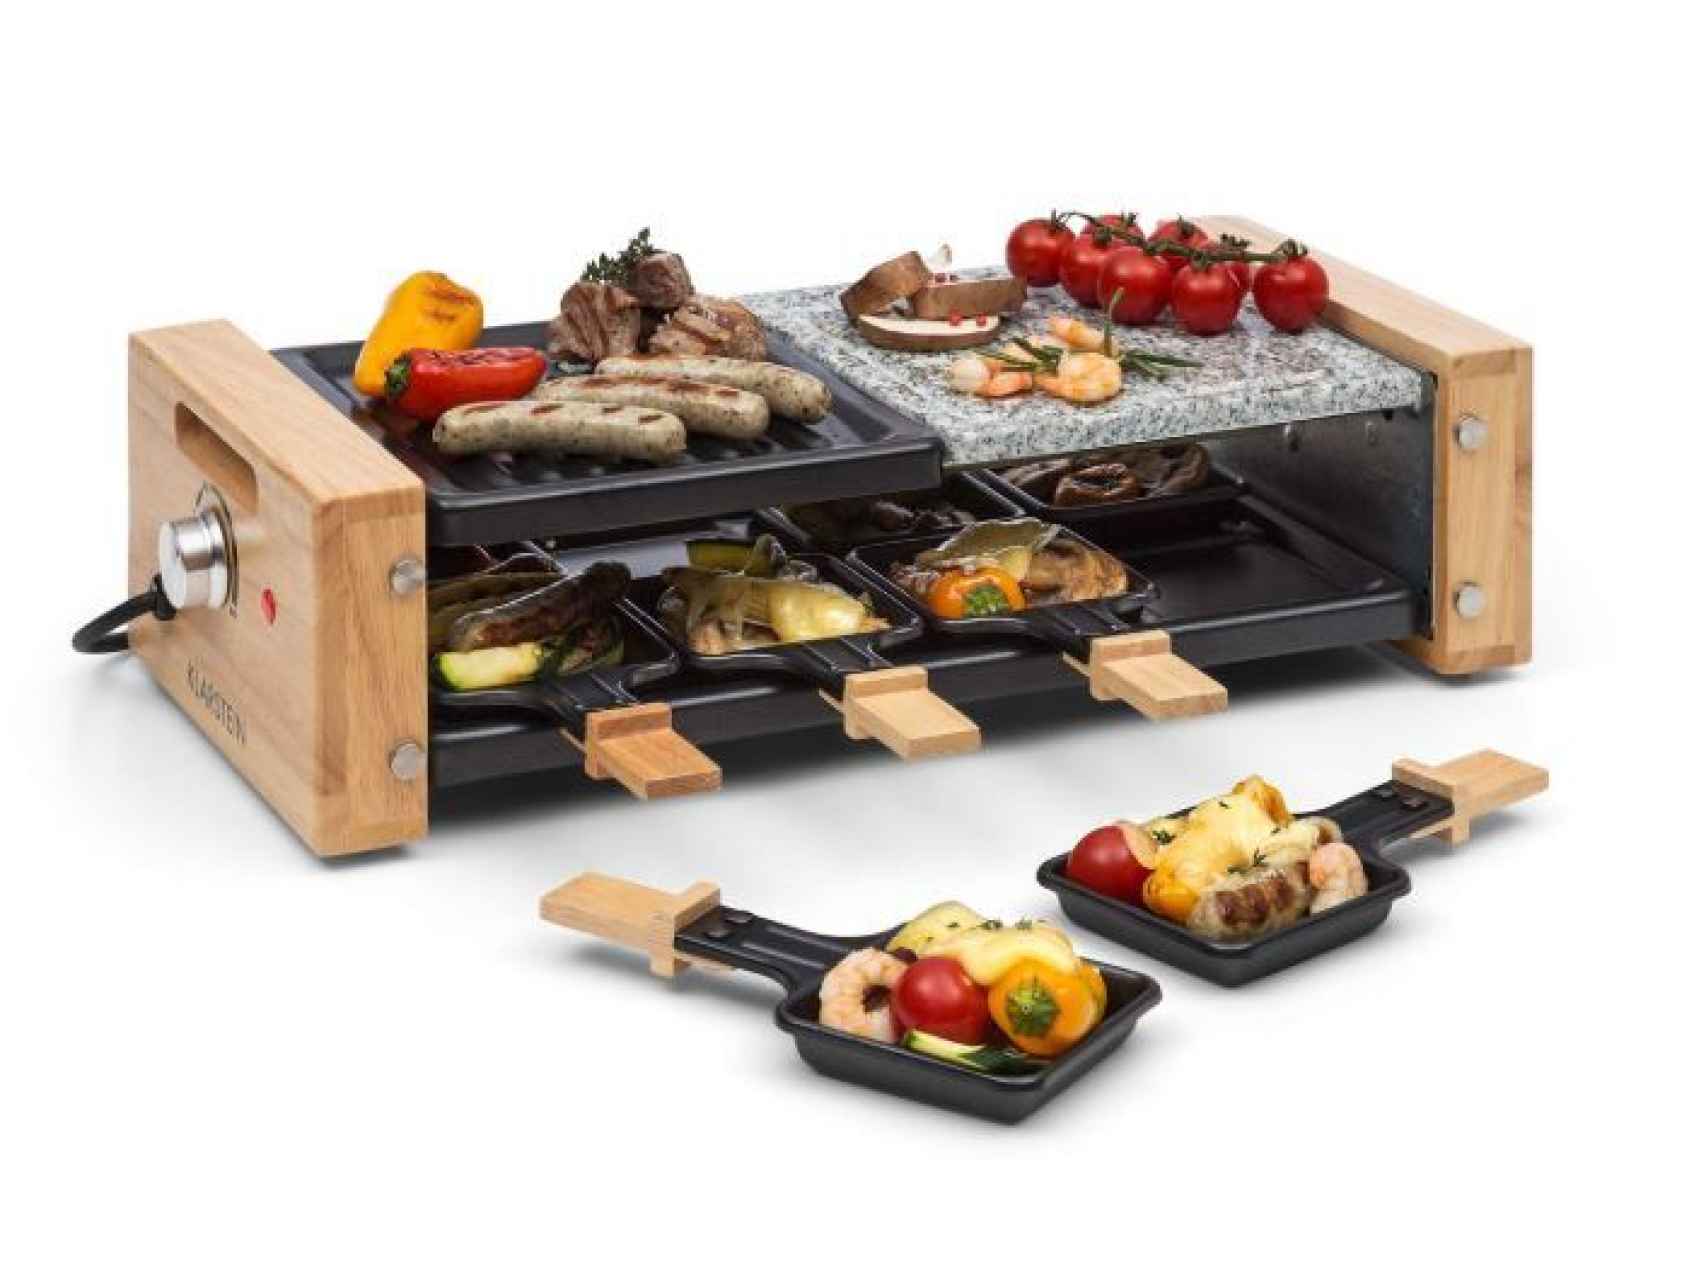 Foto: Klarstein Chateaubriand Nuovo Raclette